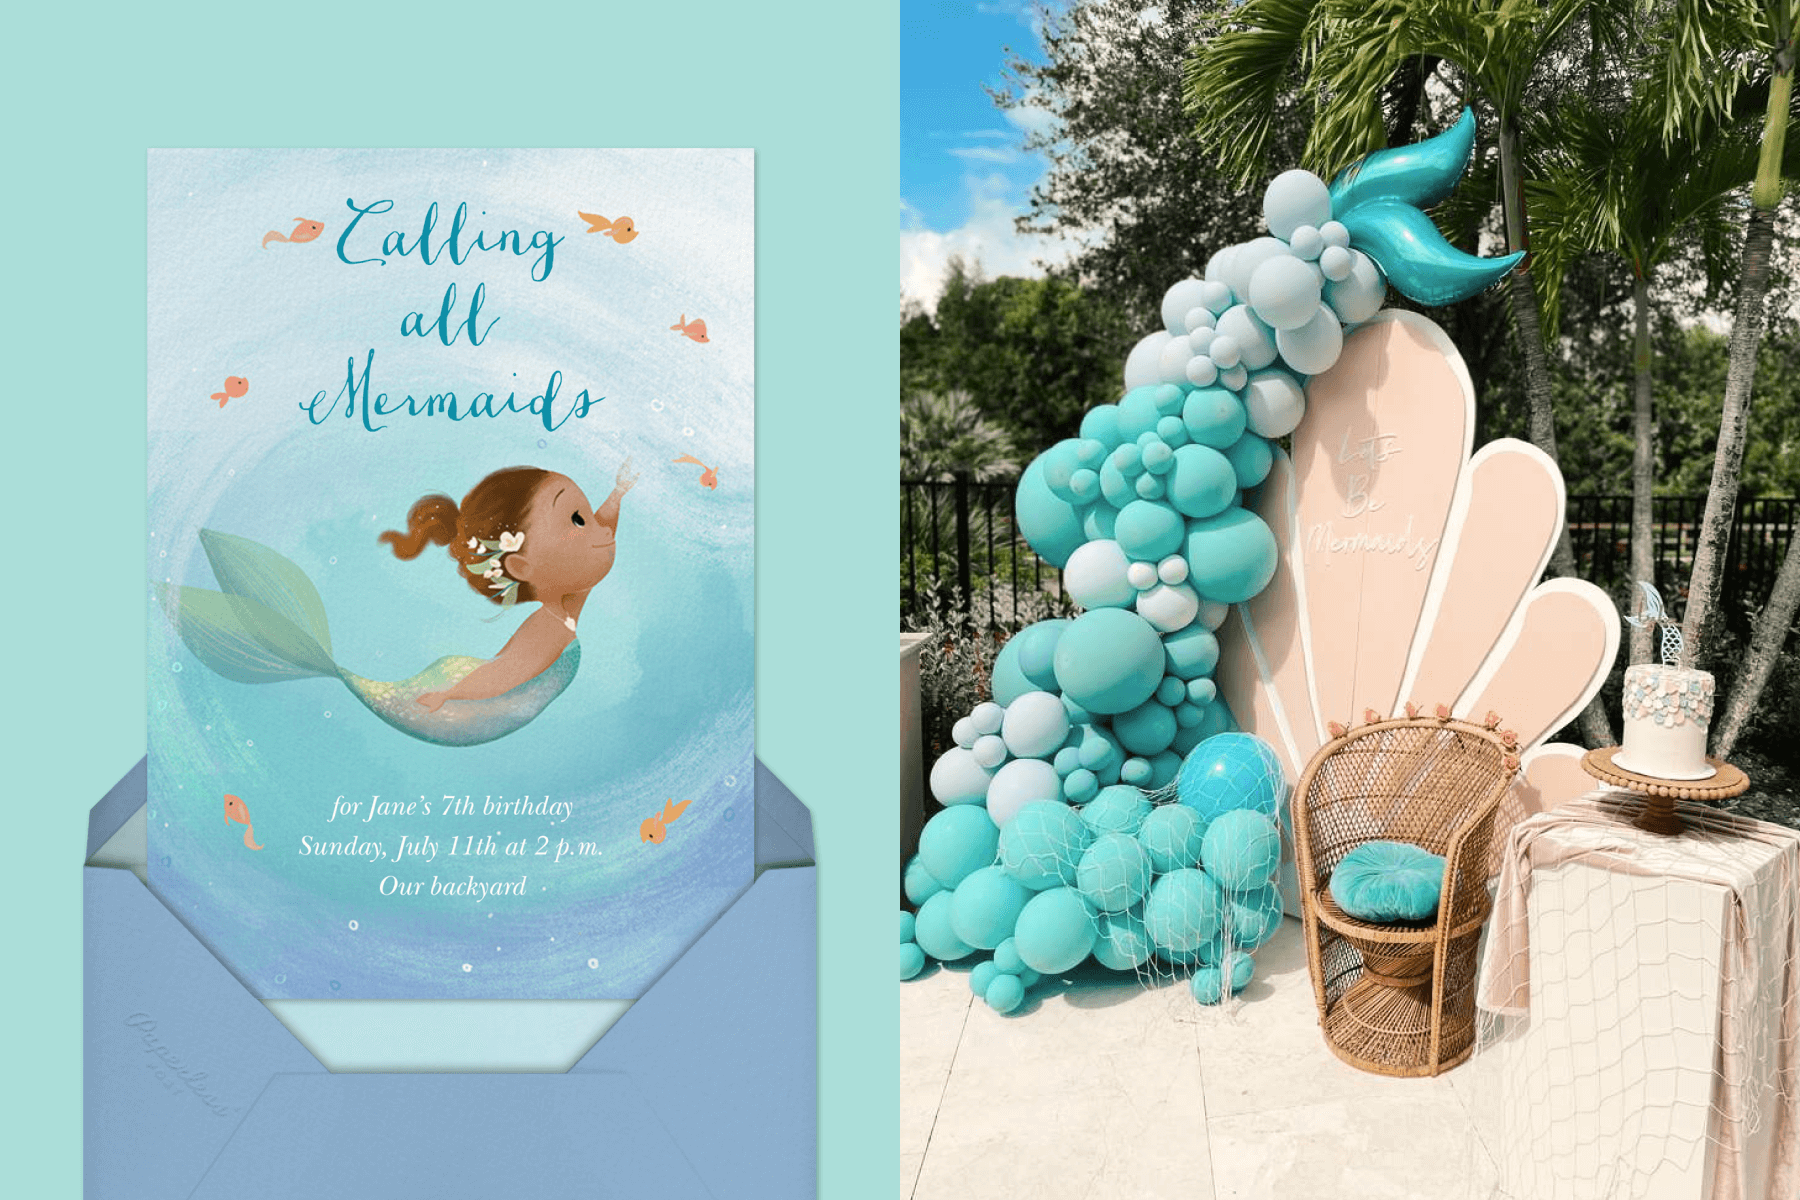 Make your mermaid party fun with these amazing idea